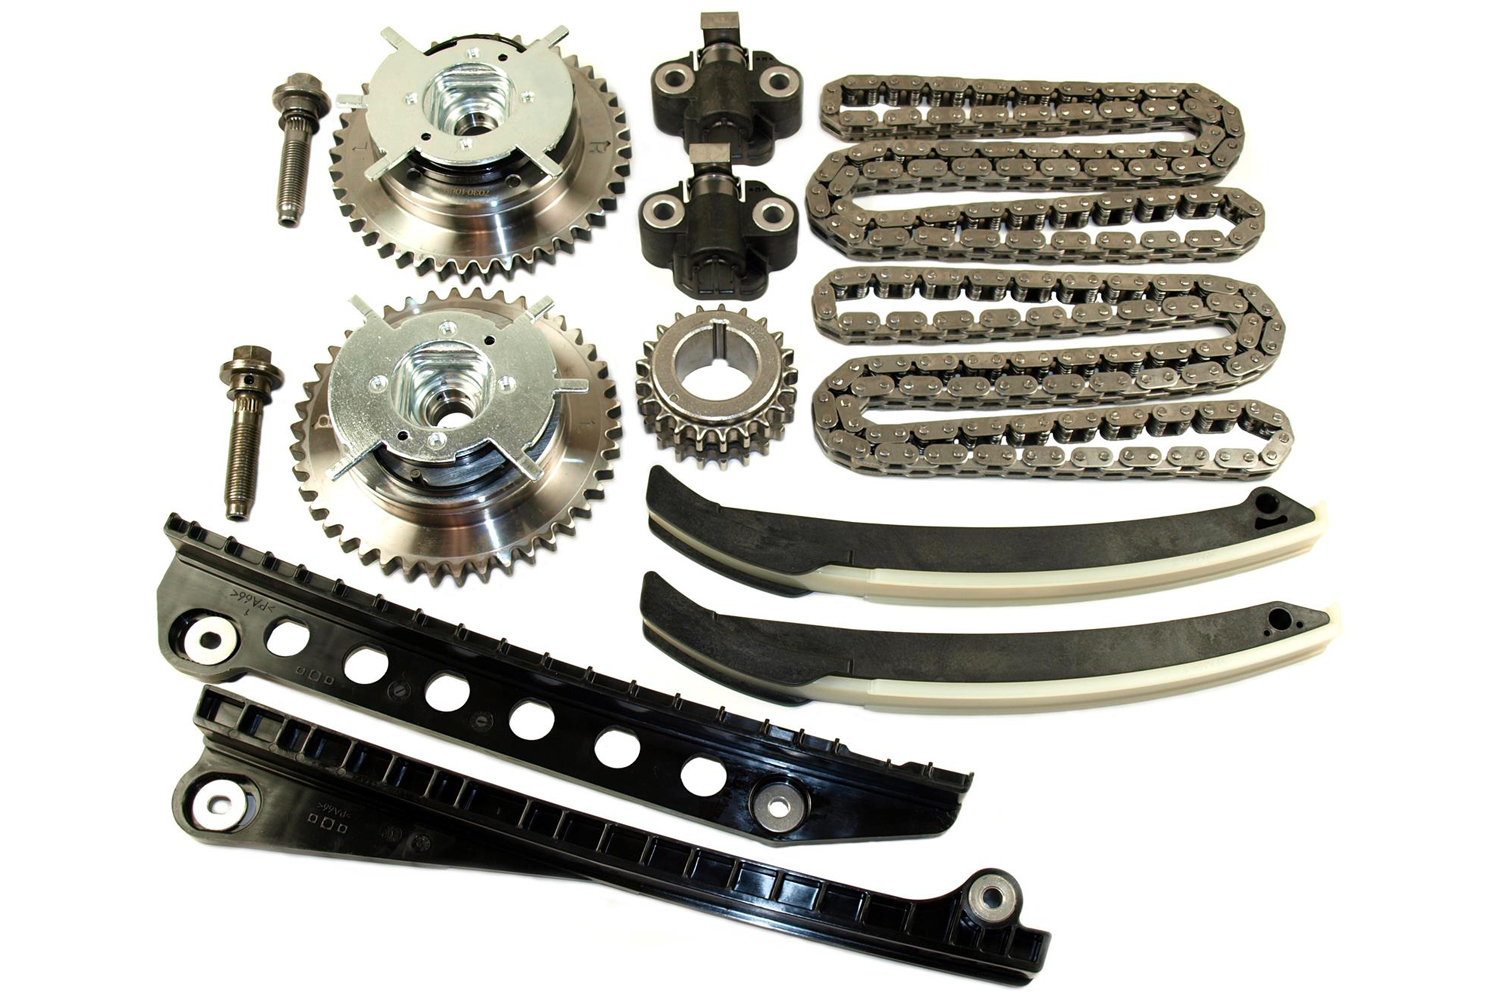 Cloyes 9-0391SBVVT - Timing Chain Set, Single Roller, Guides / Tensioners / Tensioner Arms / Steel Gears, Ford Modular 2004-14, Kit